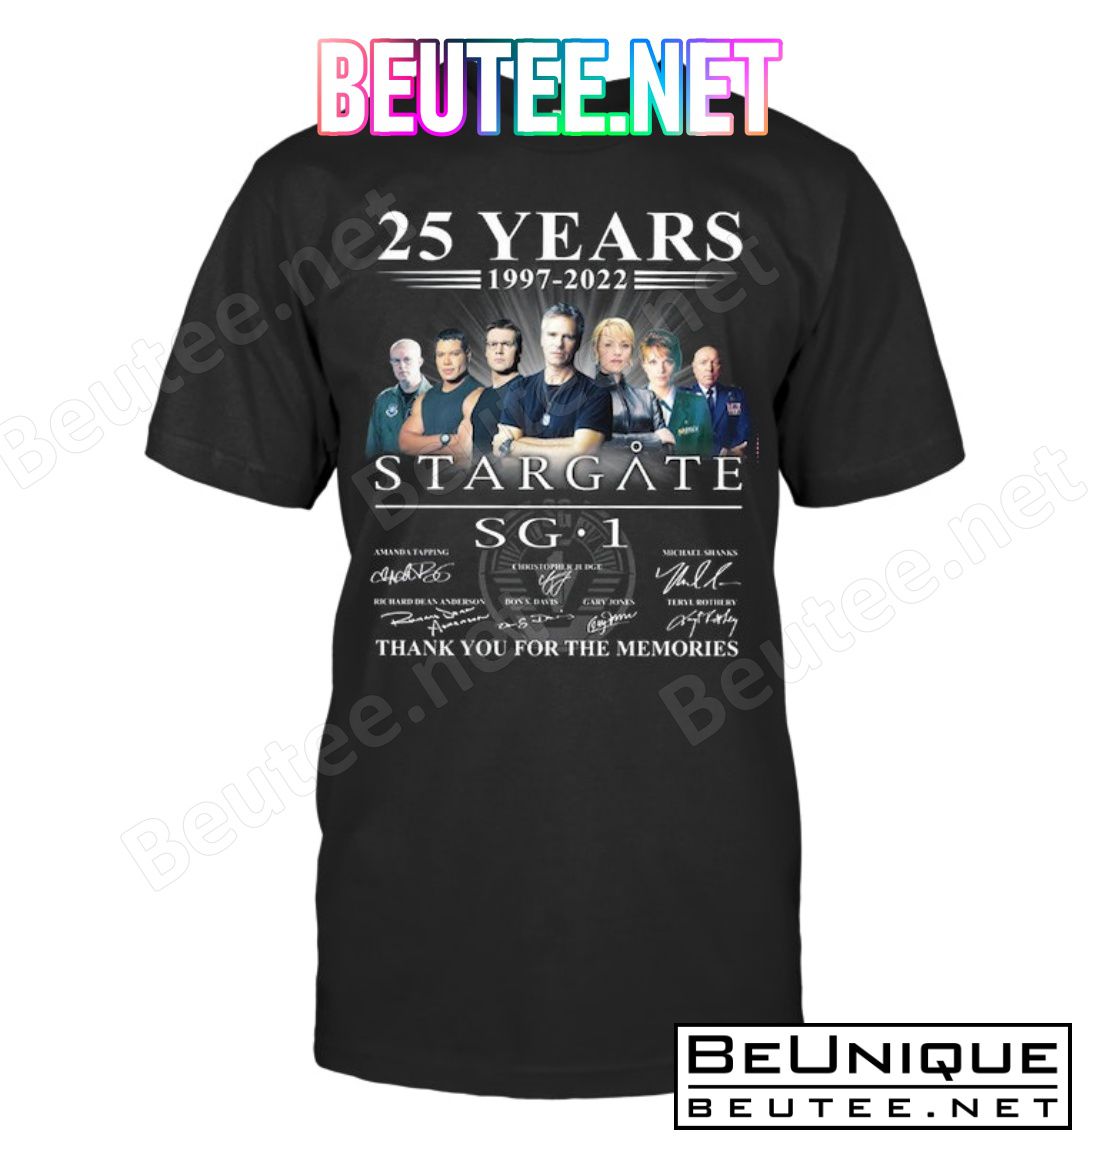 25 Years 1997-2022 Stargate Sg1 Signatures Thank You For The Memories Shirt